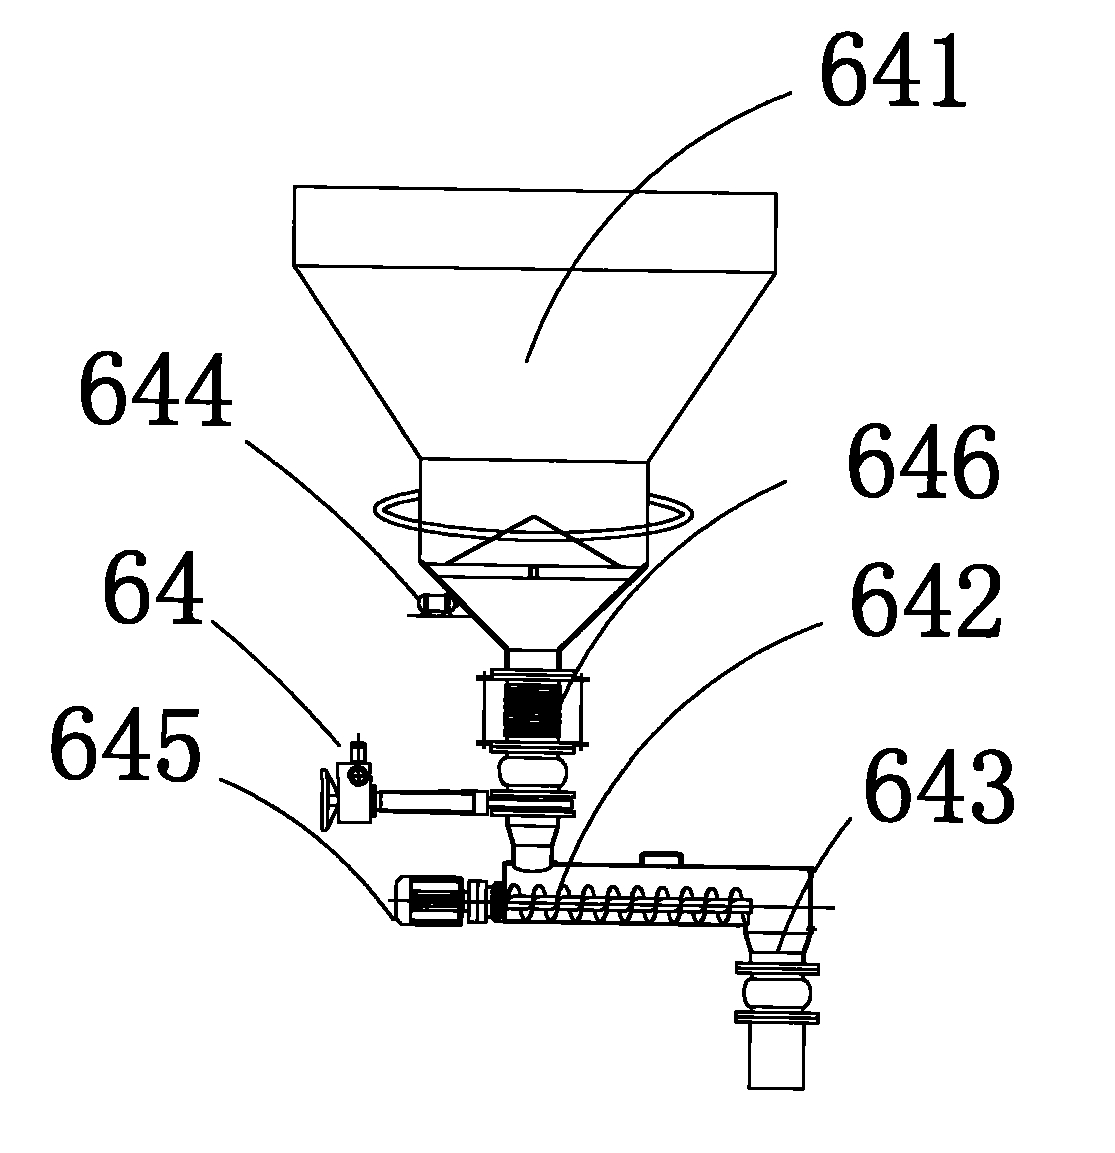 Rapid dewatering and curing method for sludge